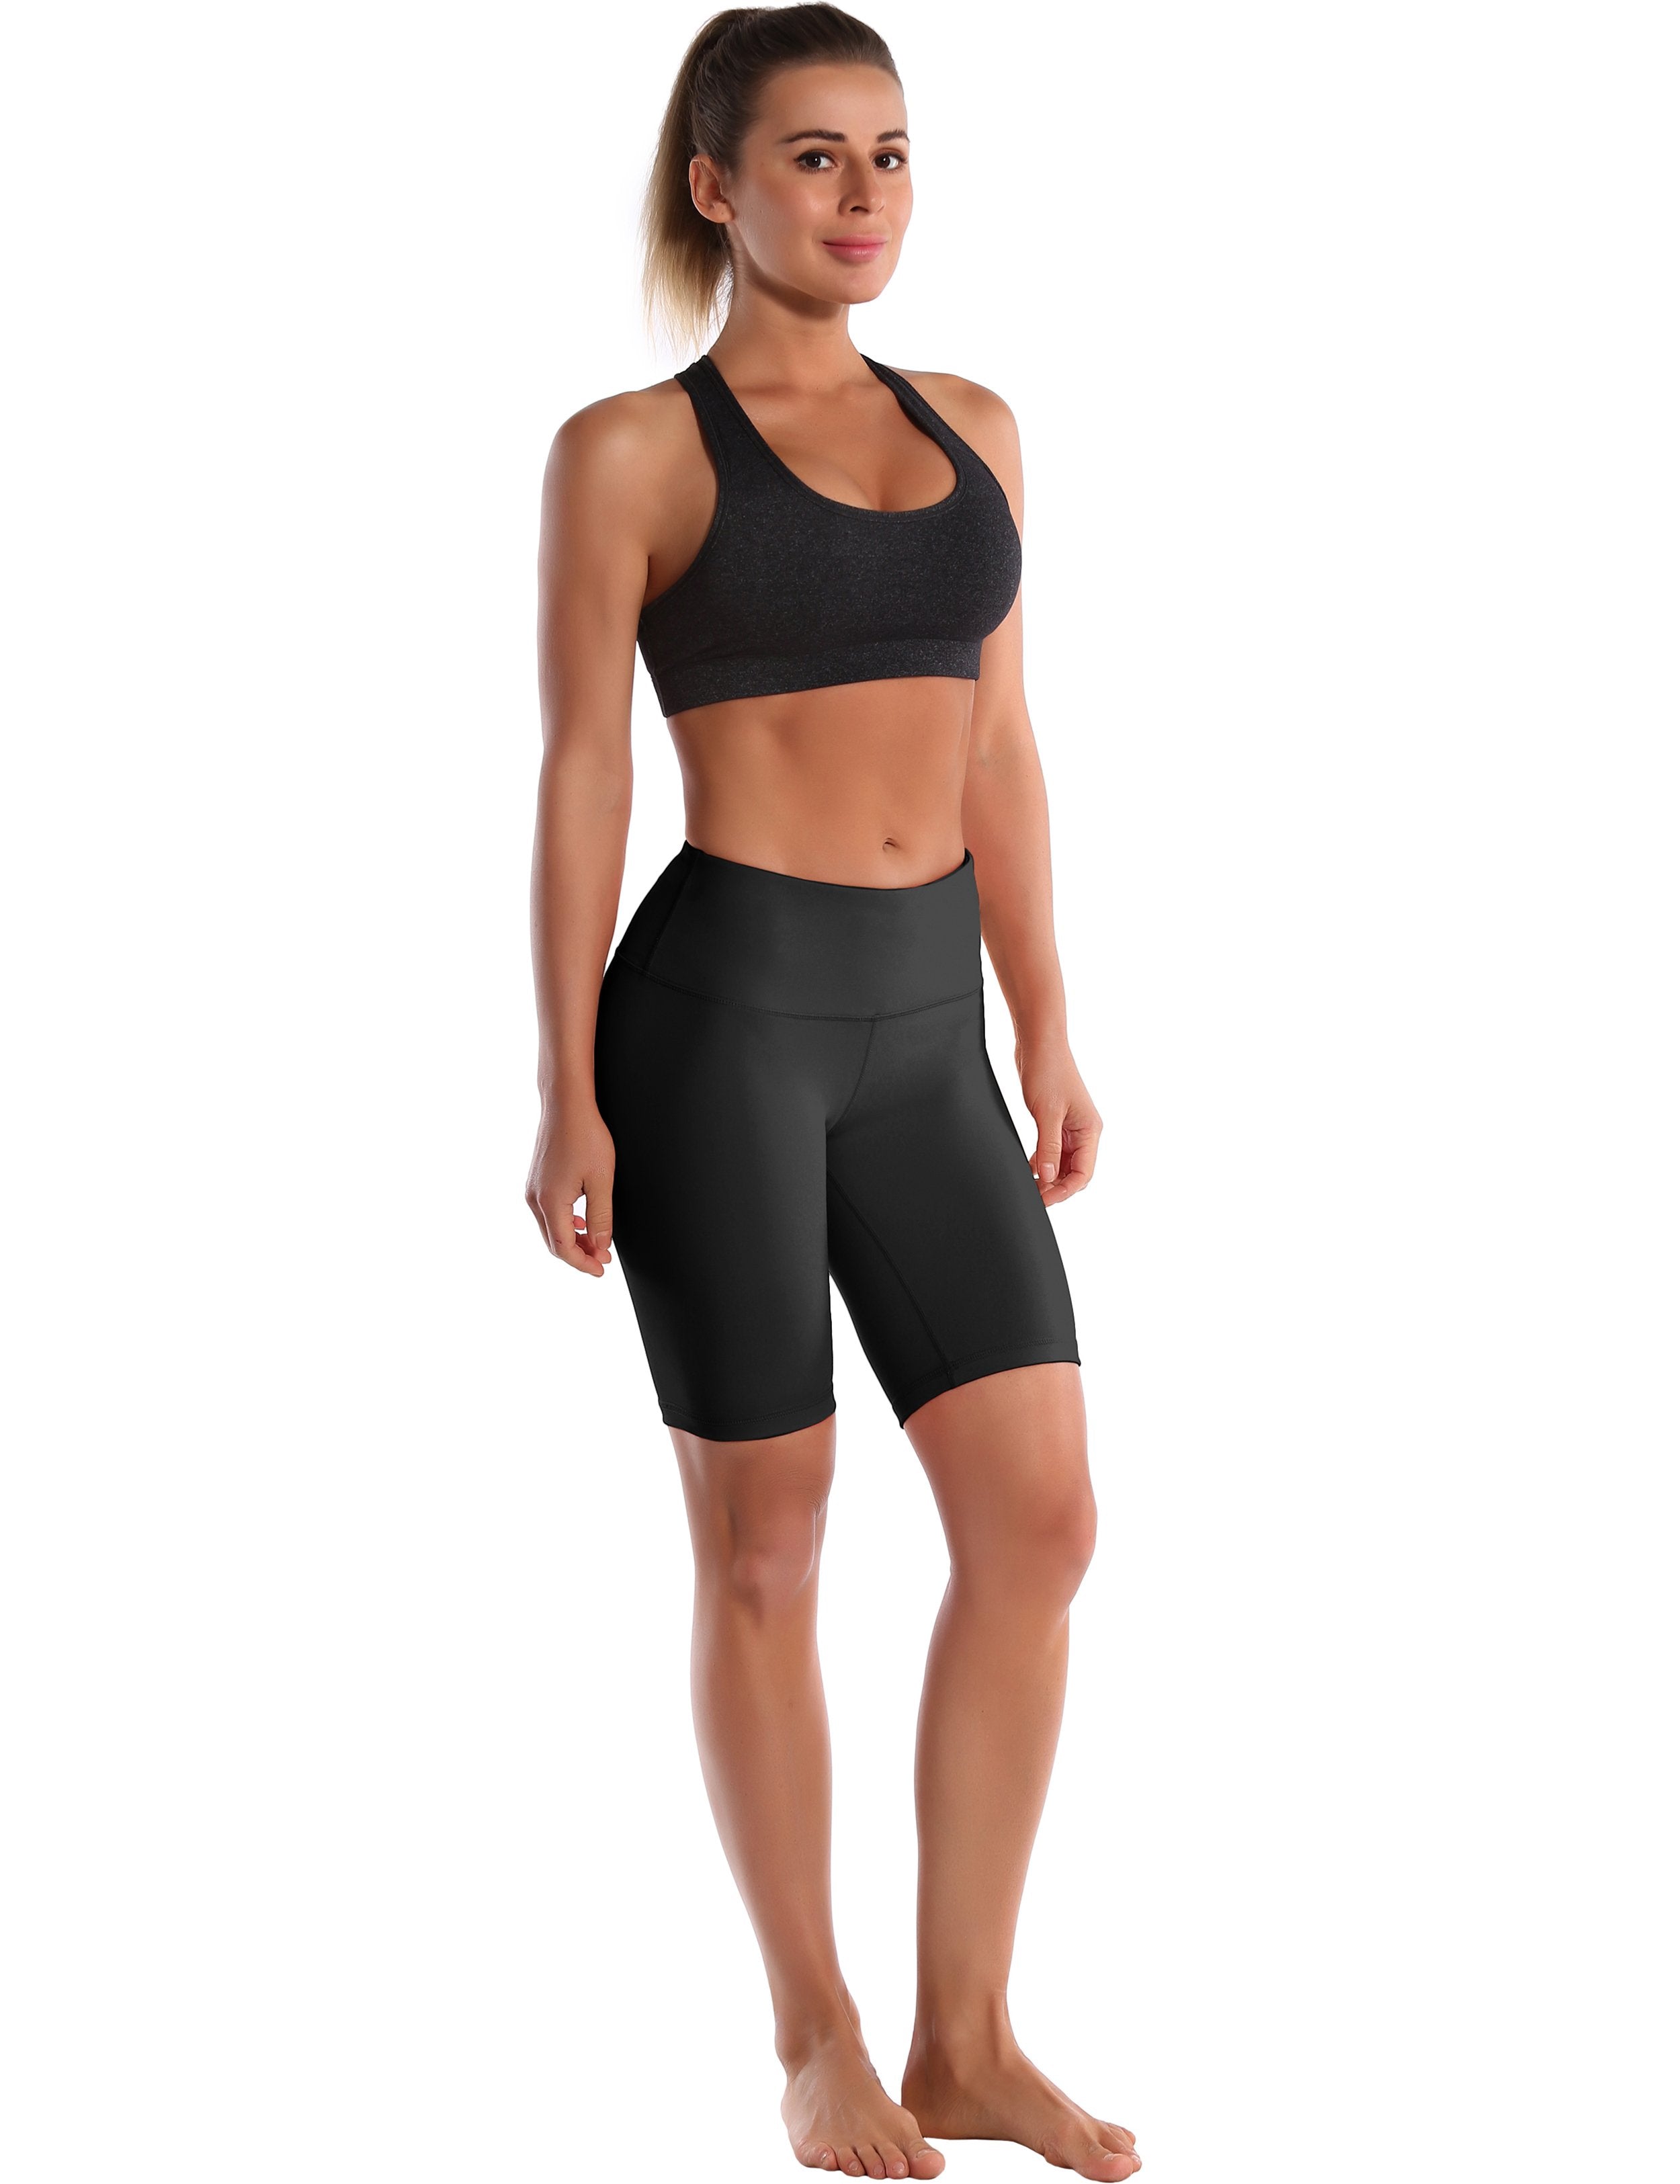 8" High Waist Plus Size Shorts black Sleek, soft, smooth and totally comfortable: our newest style is here. Softest-ever fabric High elasticity High density 4-way stretch Fabric doesn't attract lint easily No see-through Moisture-wicking Machine wash 75% Nylon, 25% Spandex